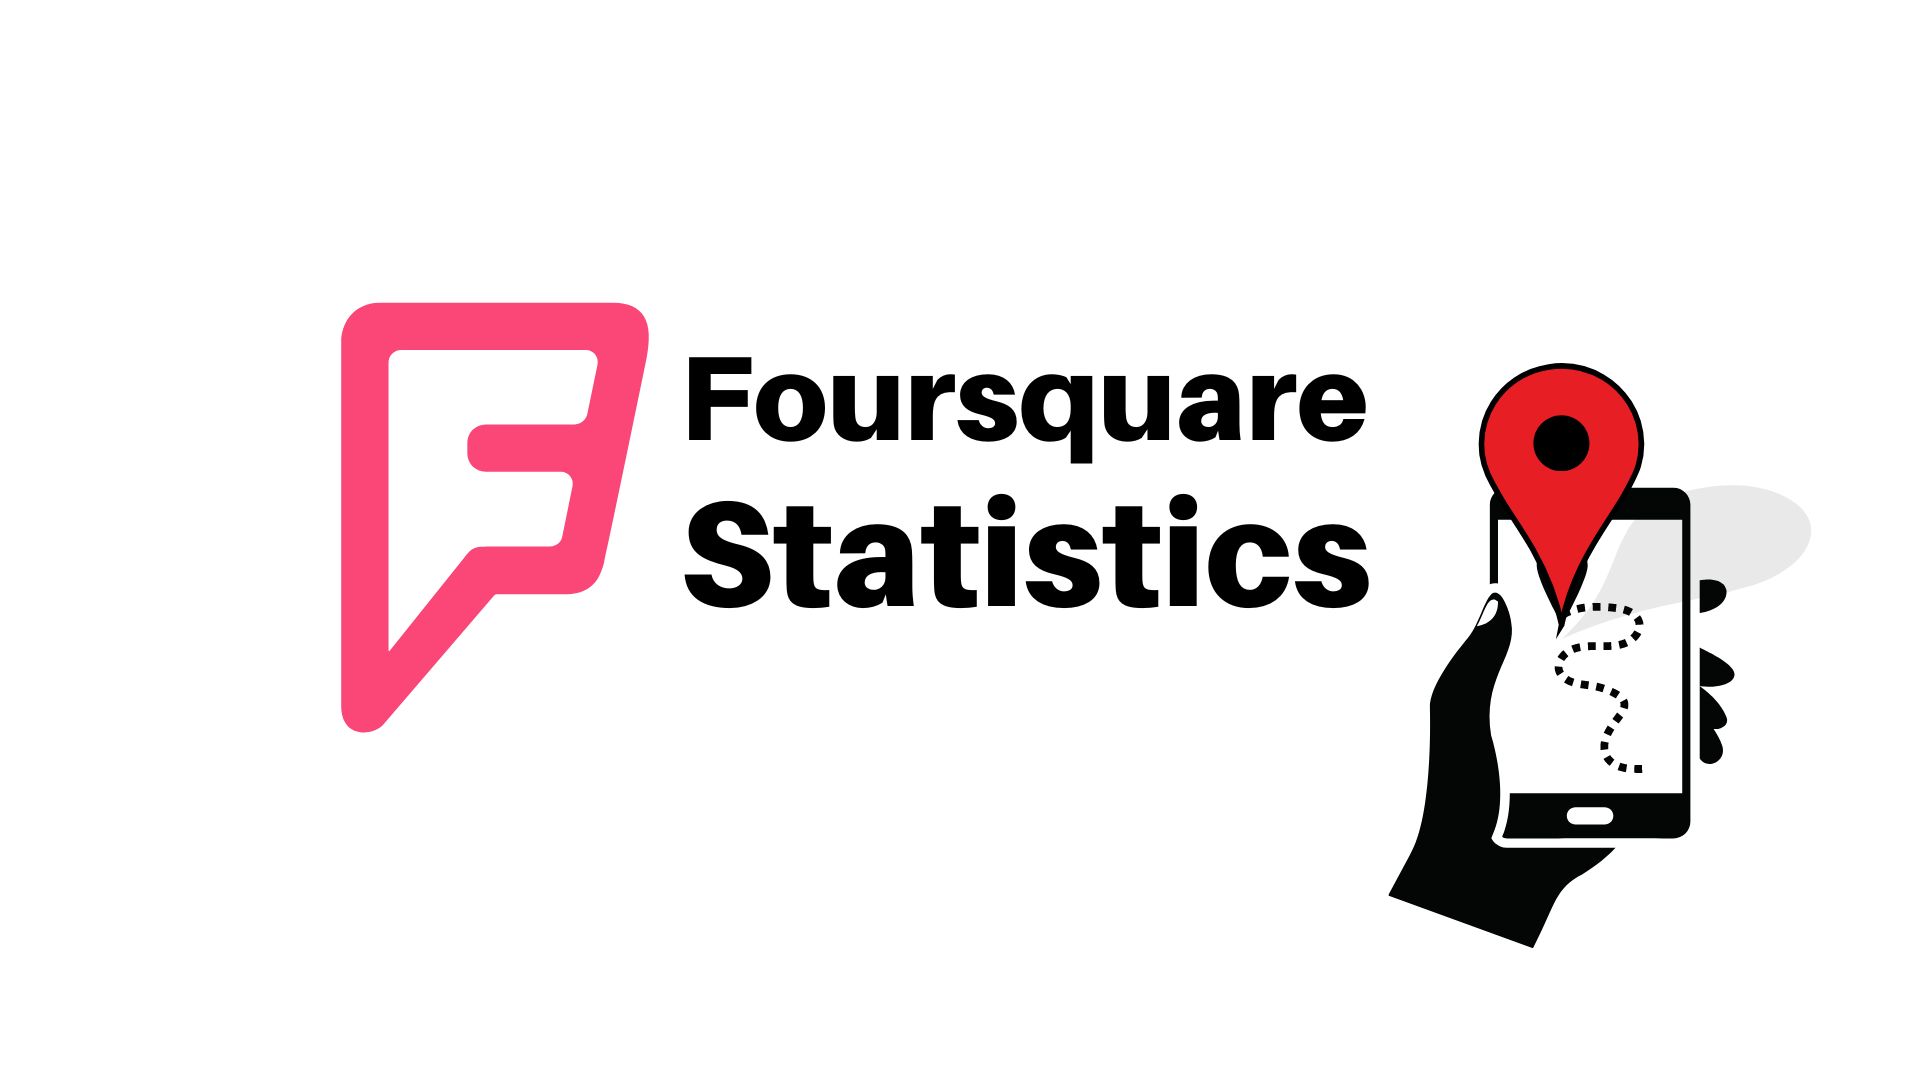 Foursquare Changed Its Logo